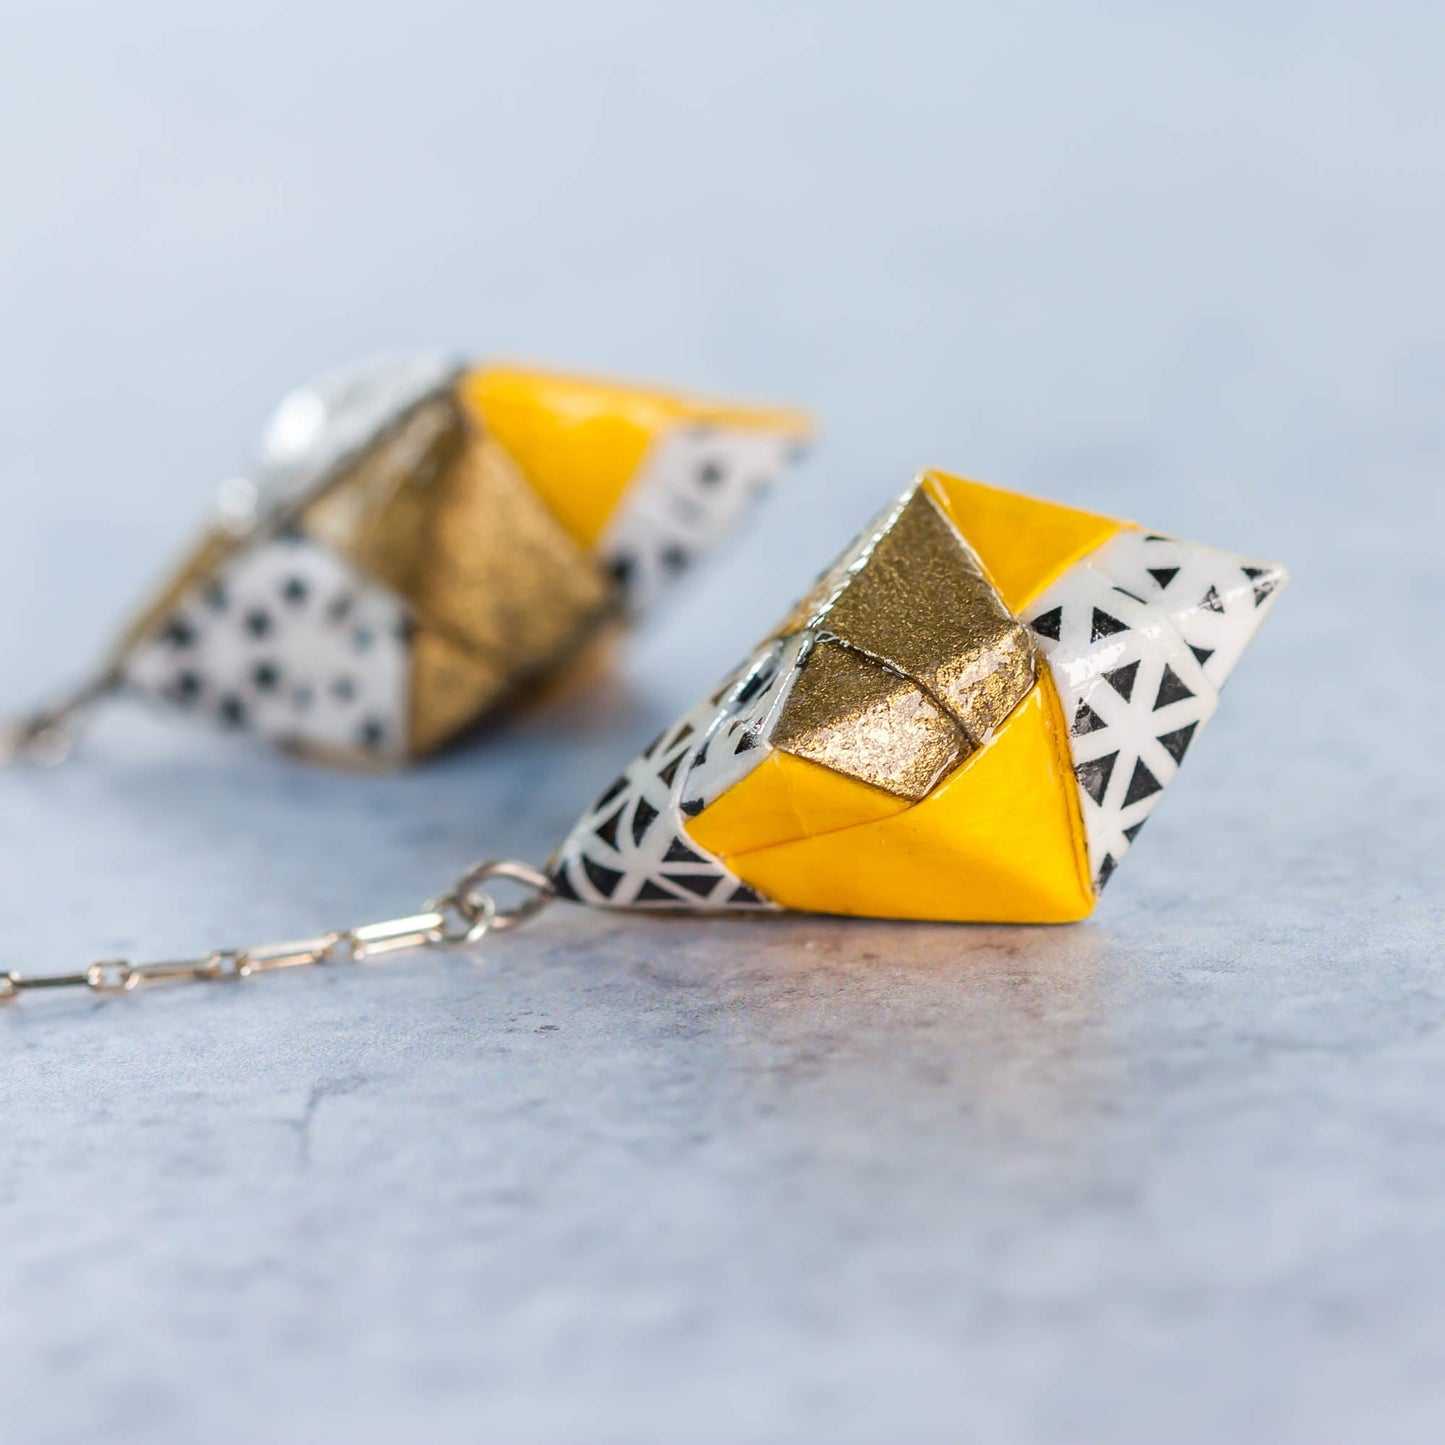 Origami Diamond Paper Earrings - Triangle Fade Gold Yellow - By LeeMo Designs in Bend, Oregon